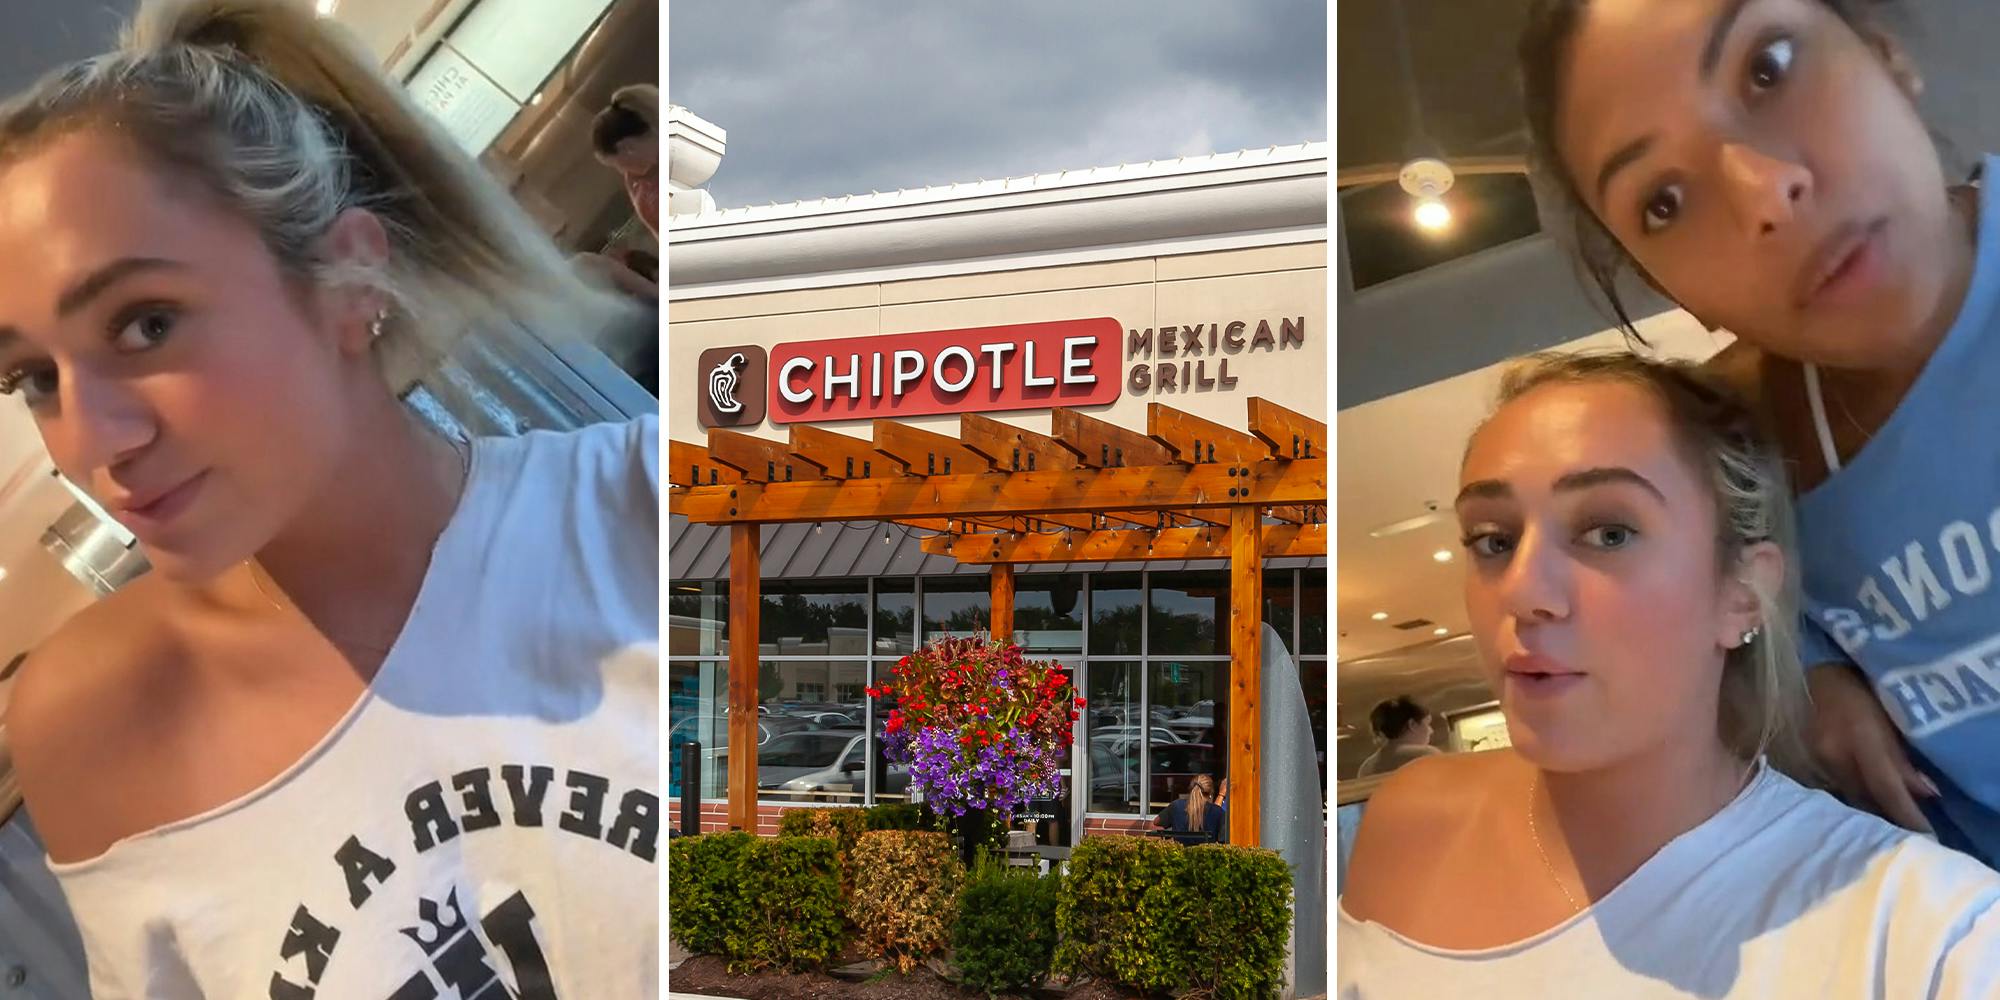 Chipotle customer orders chicken burrito, is shocked by what she finds inside